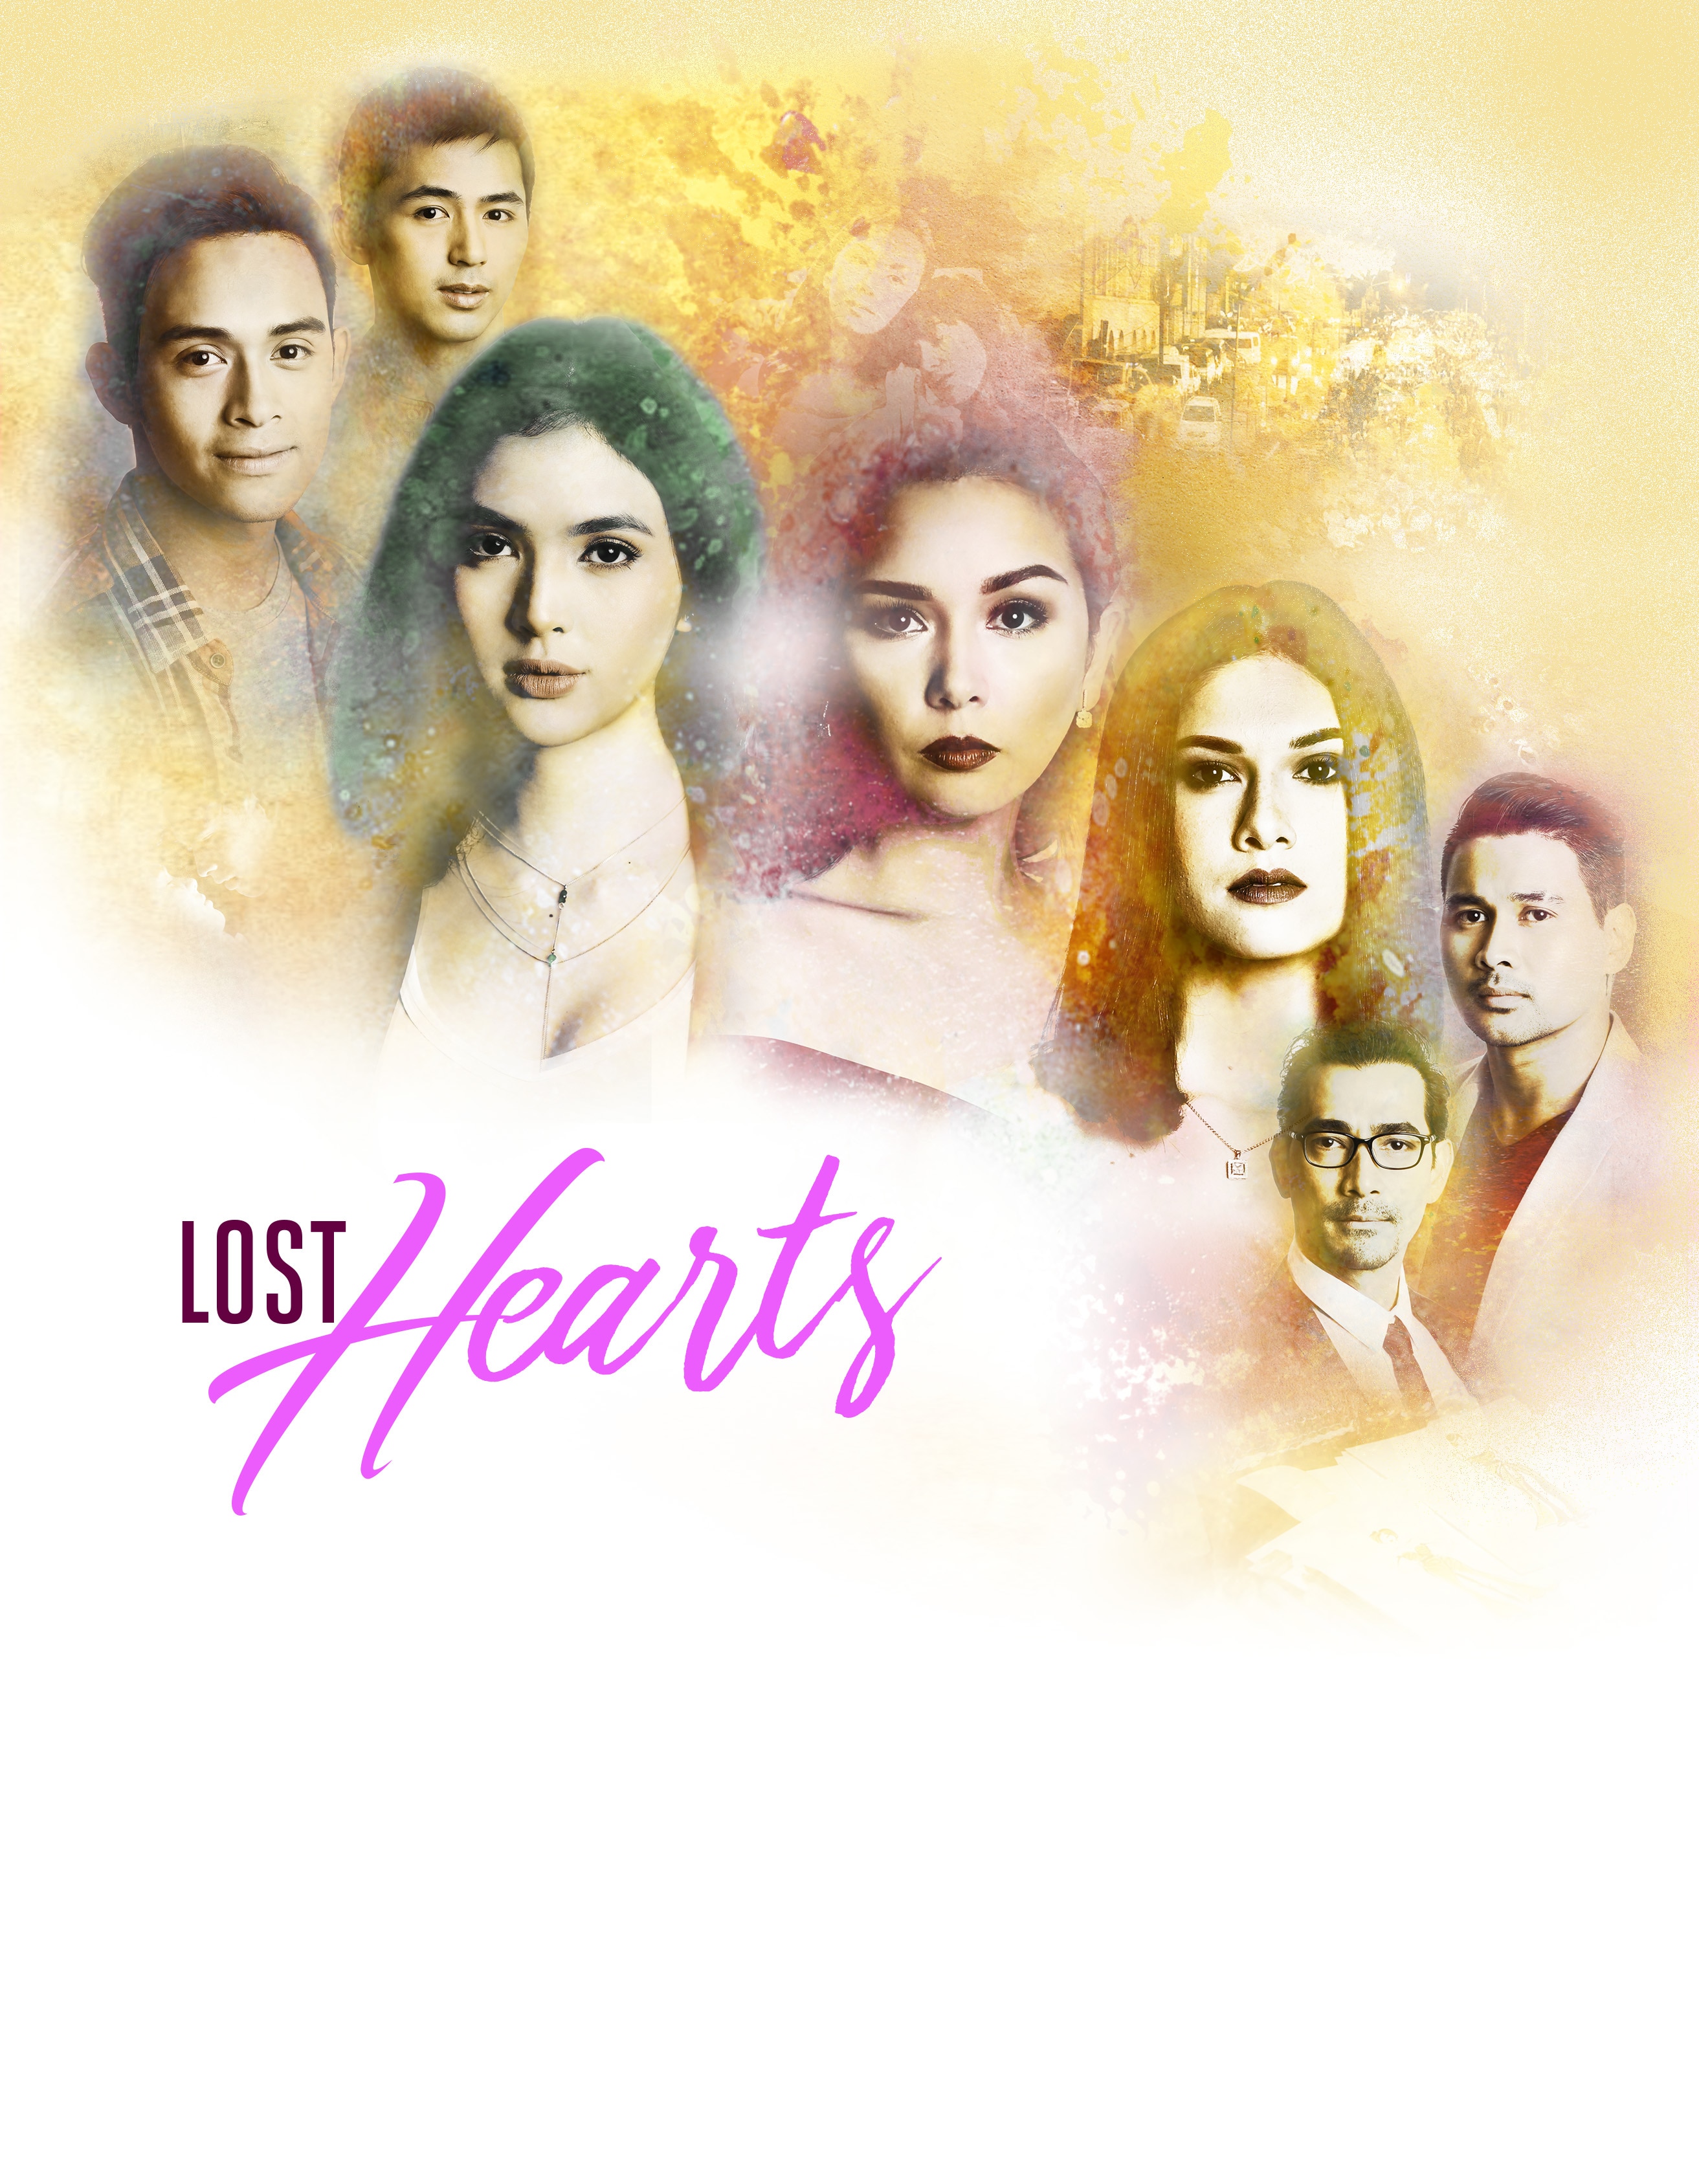 https://data-corporate.abs-cbn.com/corp/medialibrary/dotcom/isd-news/298x442/lost-hearts-poster.jpg?ext=.jpg